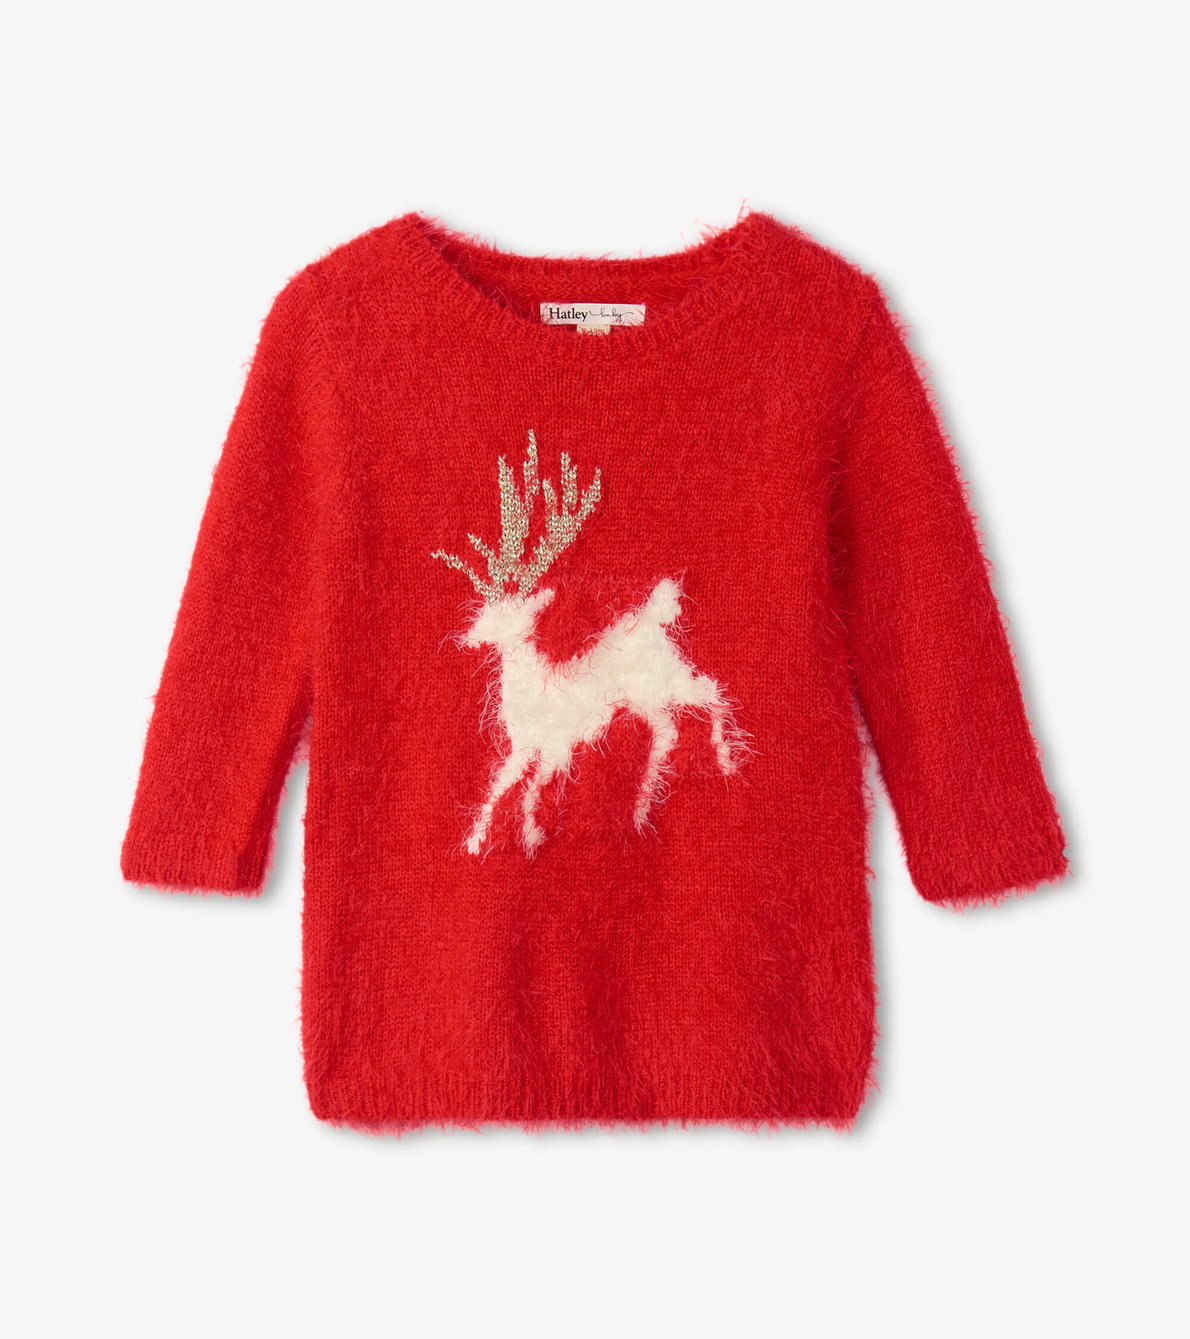 View larger image of Christmas Reindeer Fuzzy Sweater Dress